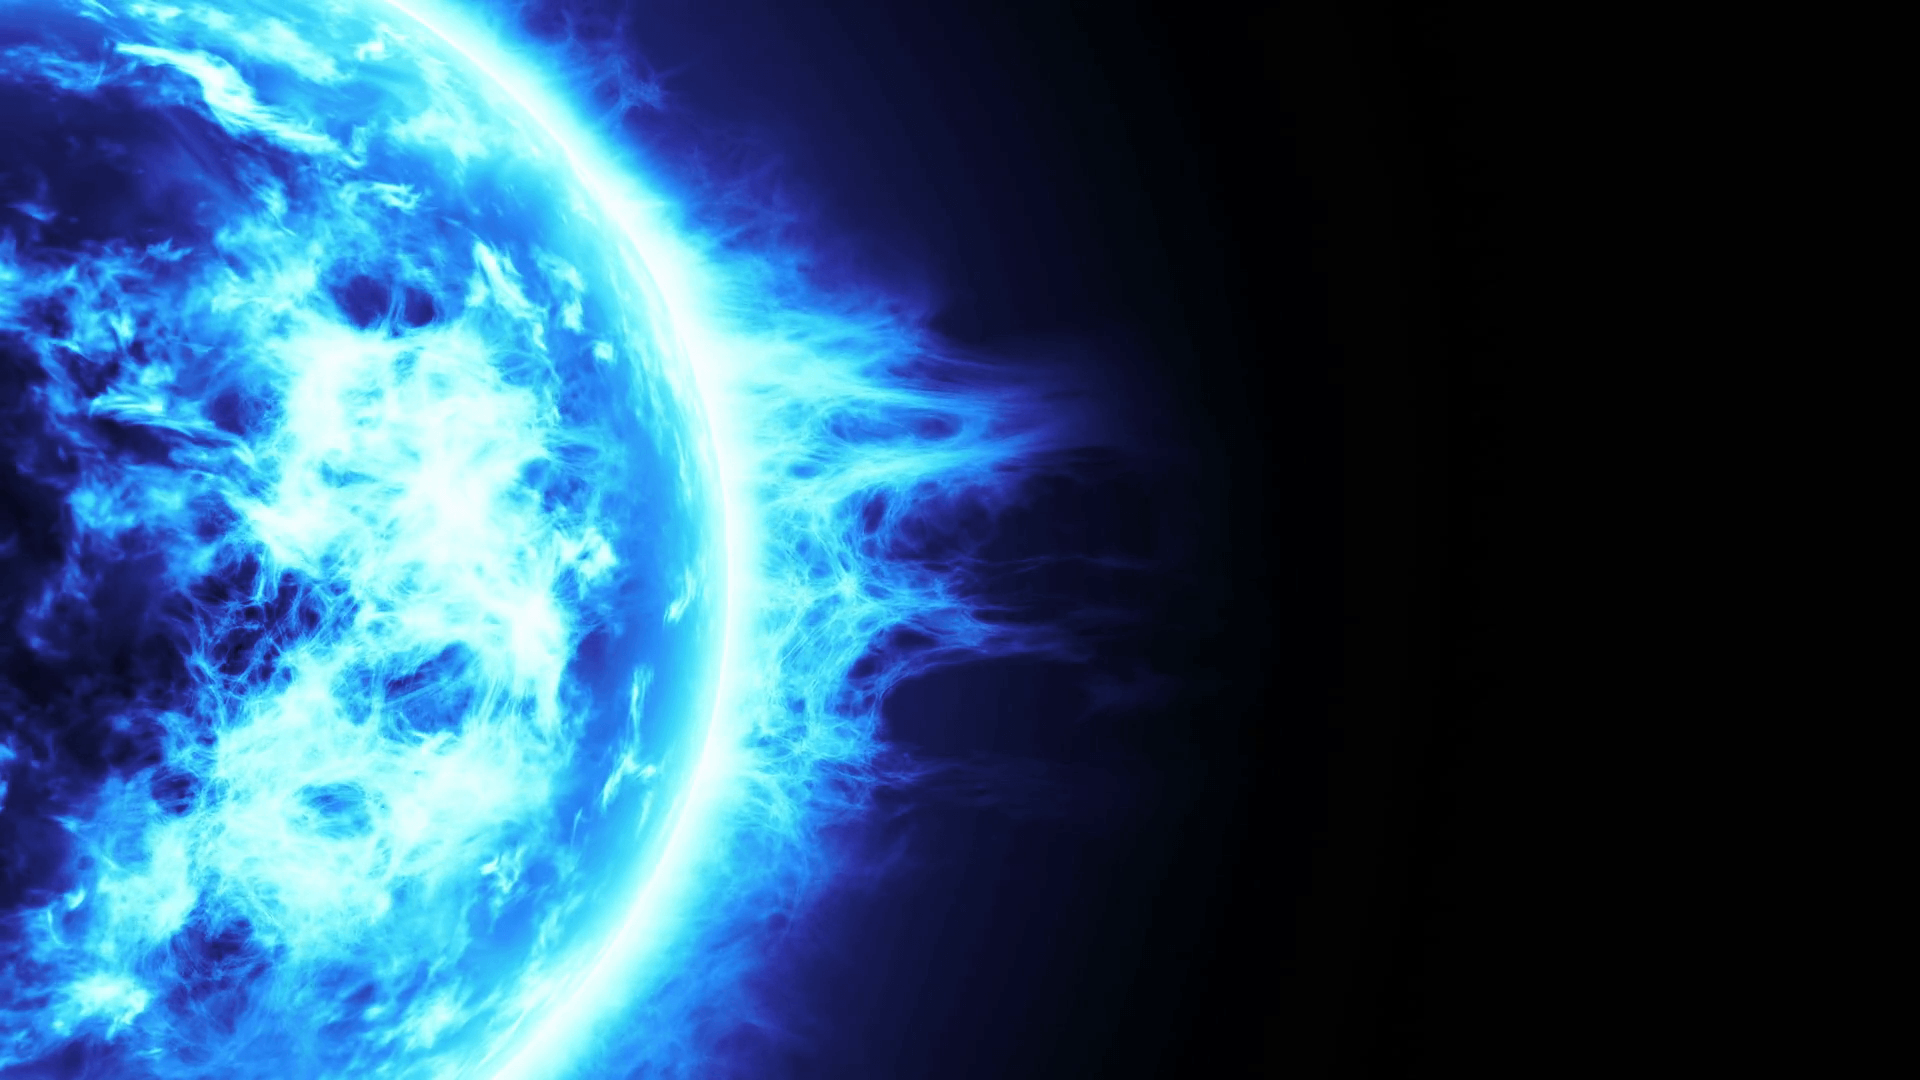 Blue Solar Flare Wallpapers - Top Free Blue Solar Flare Backgrounds